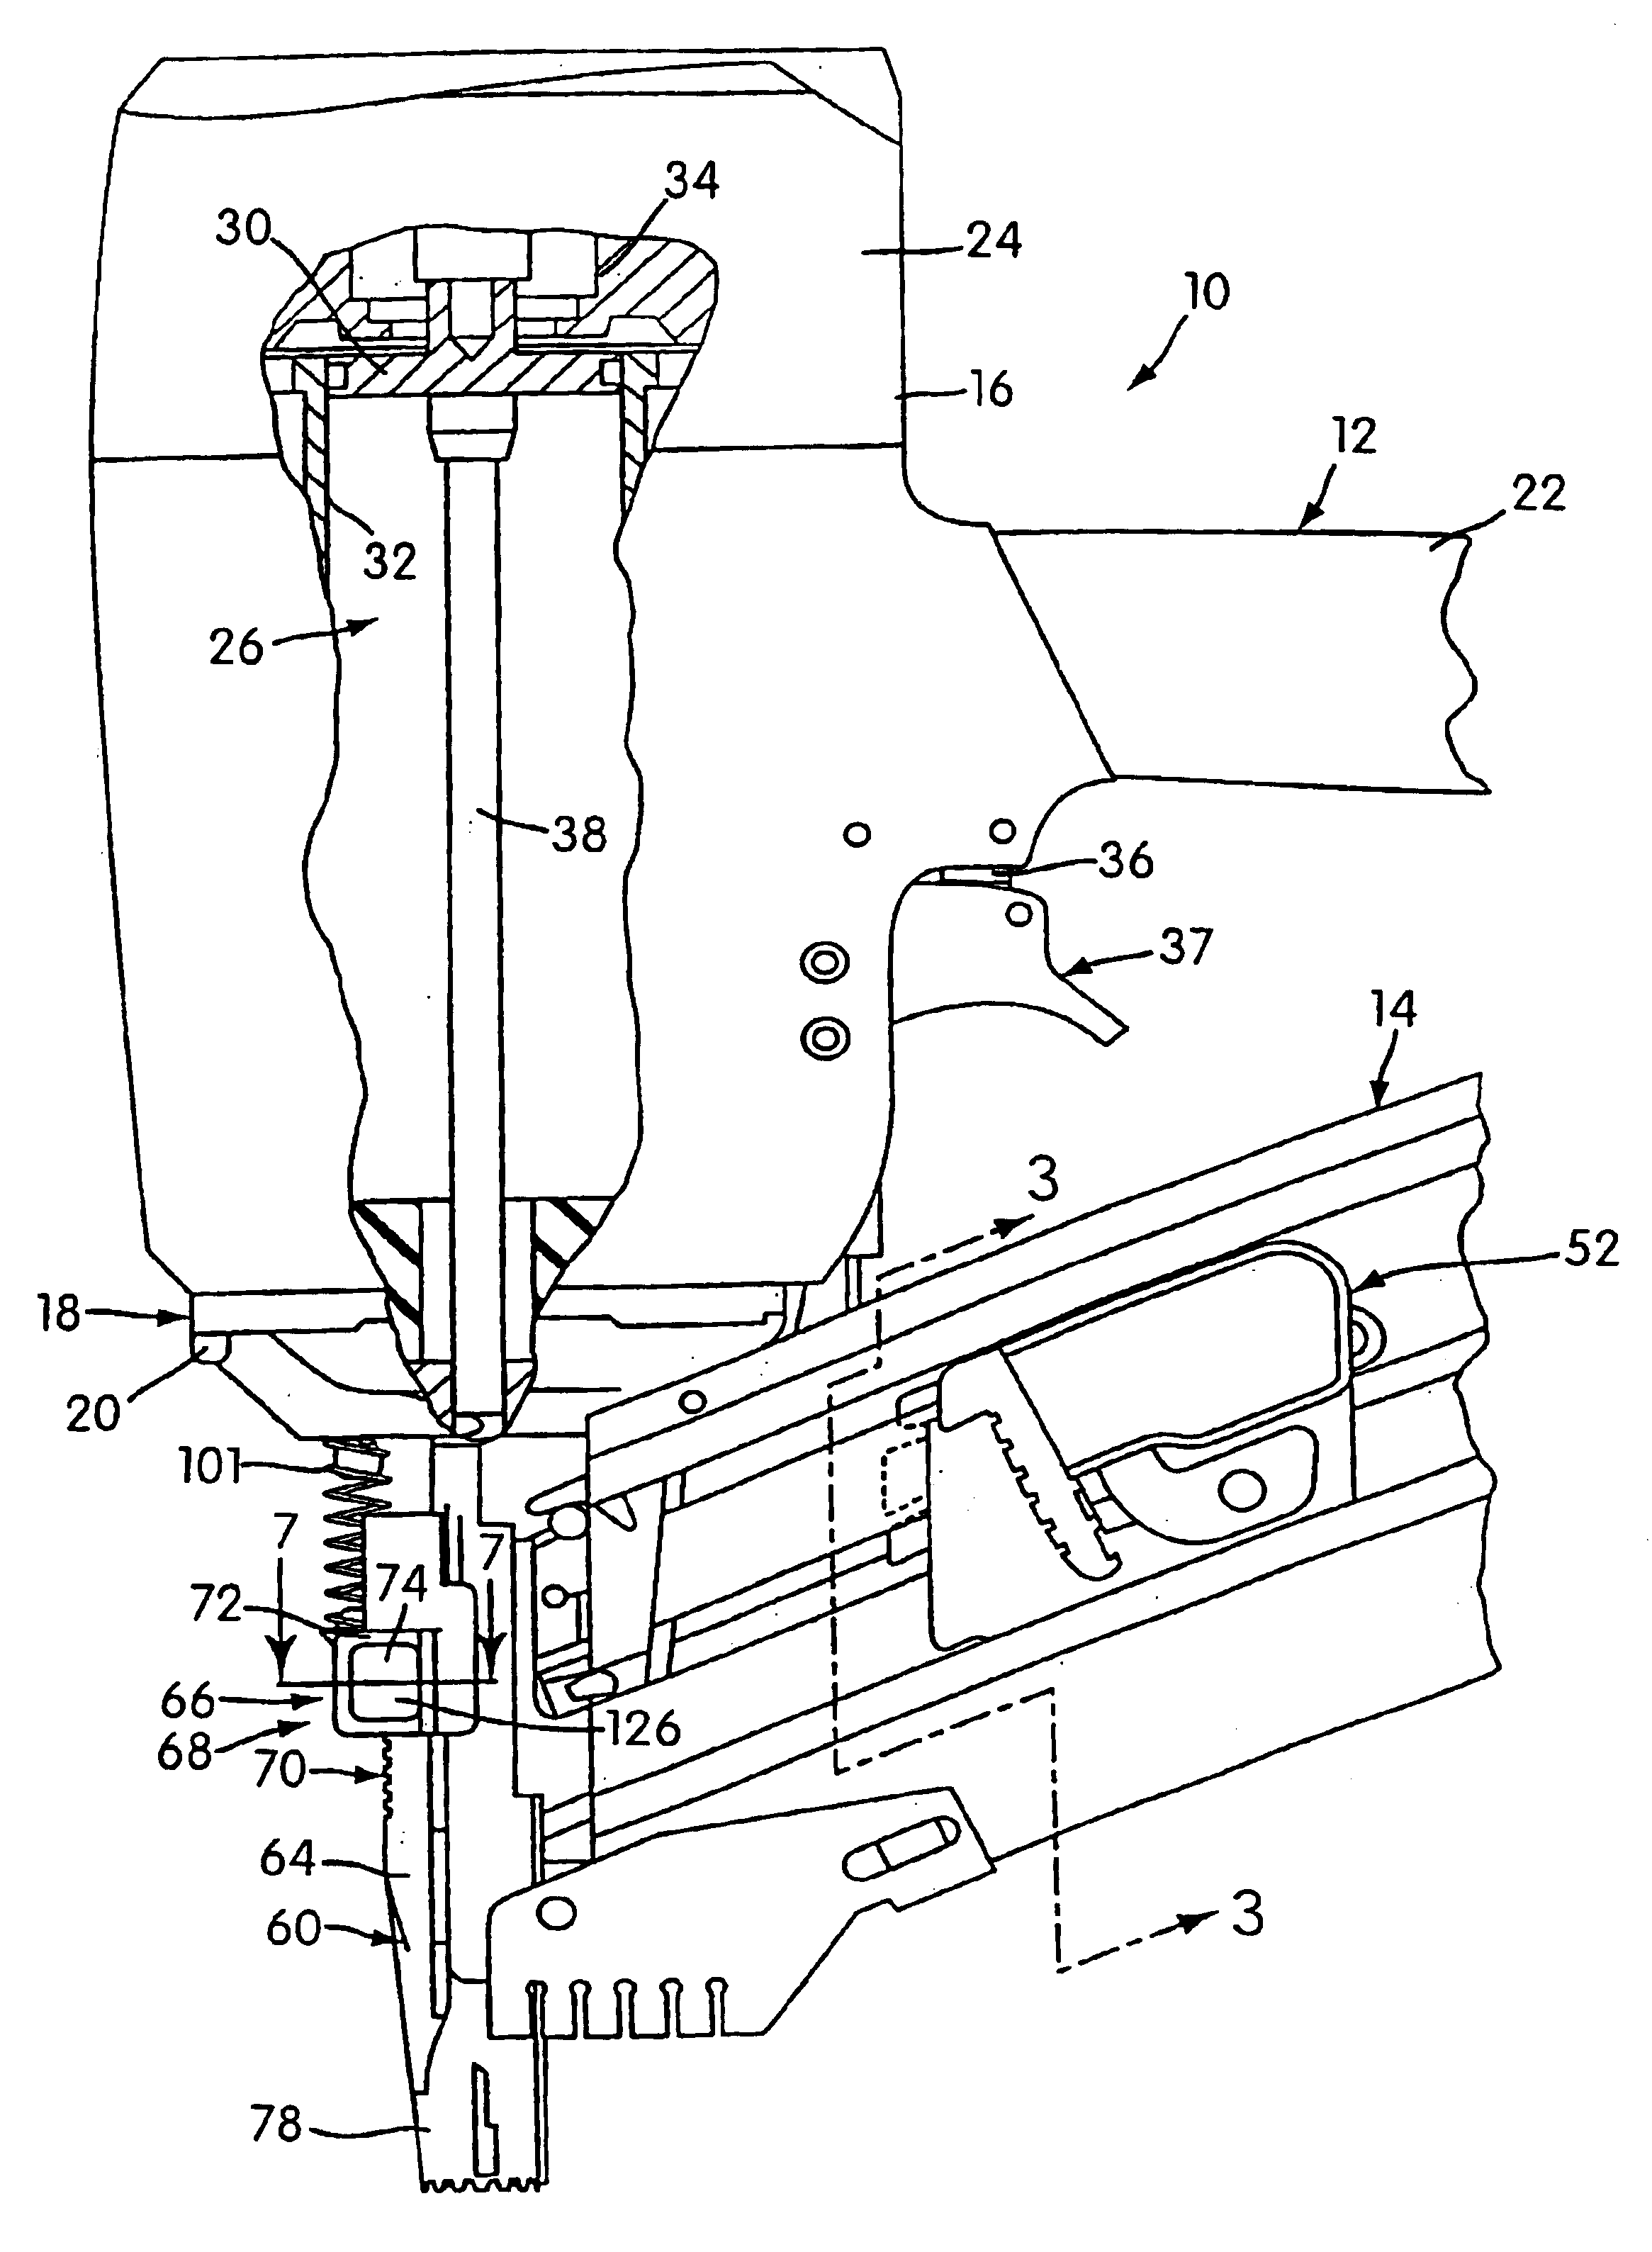 Safety trip assembly and trip lock mechanism for a fastener driving tool